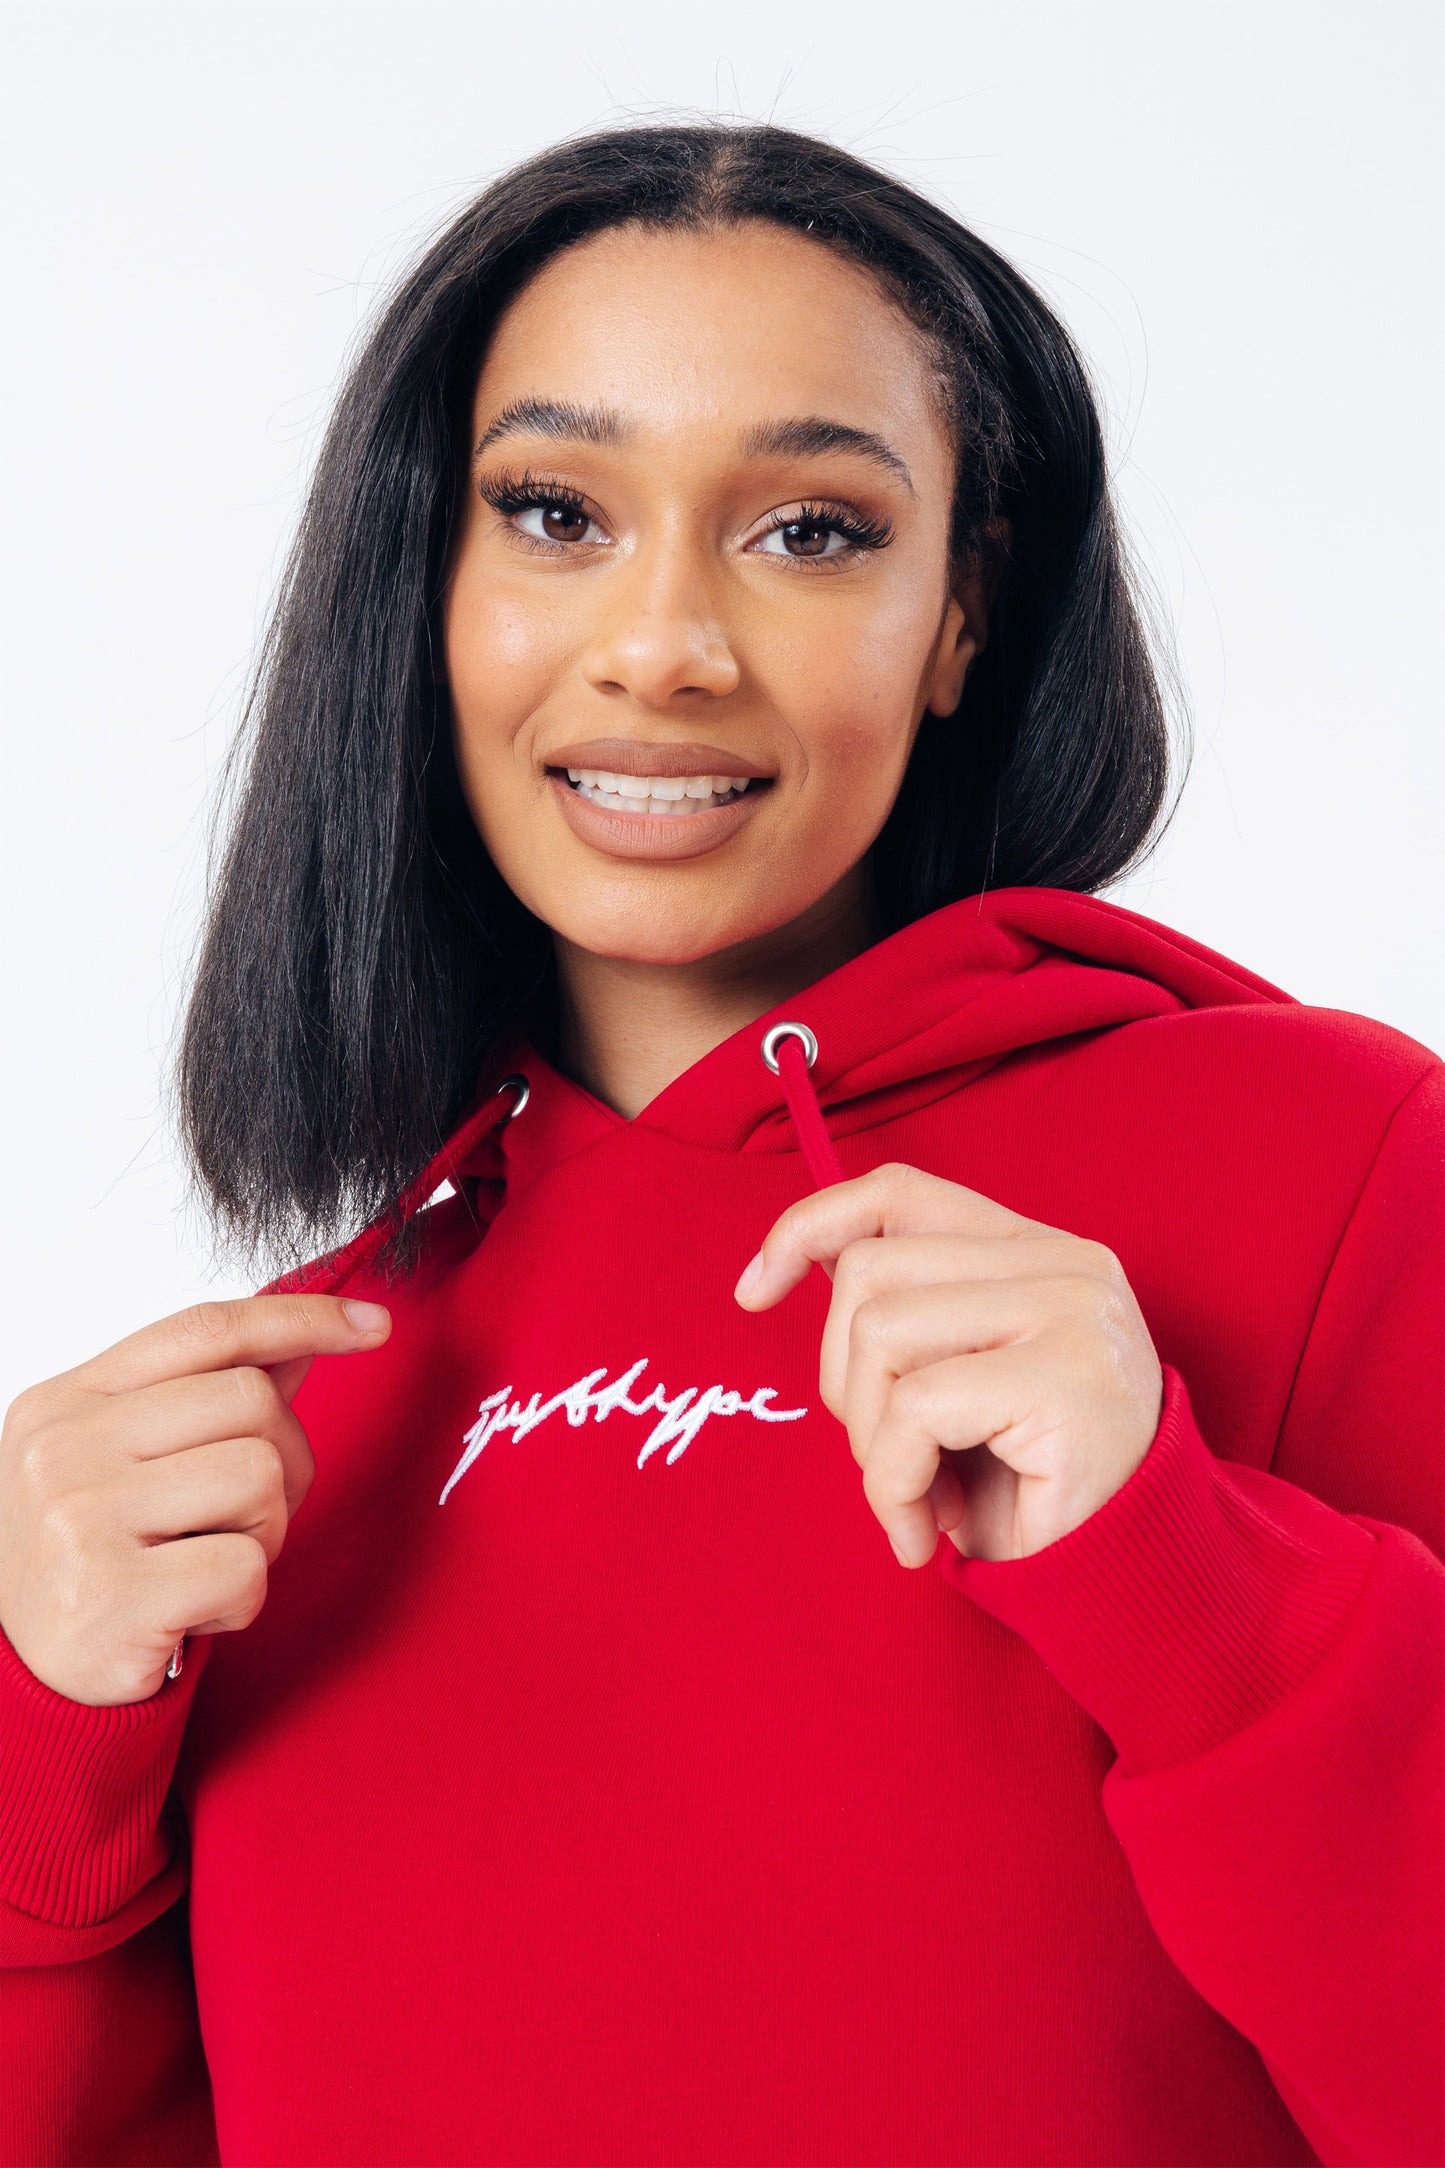 HYPE RED SCRIBBLE LOGO WOMEN'S PULLOVER HOODIE